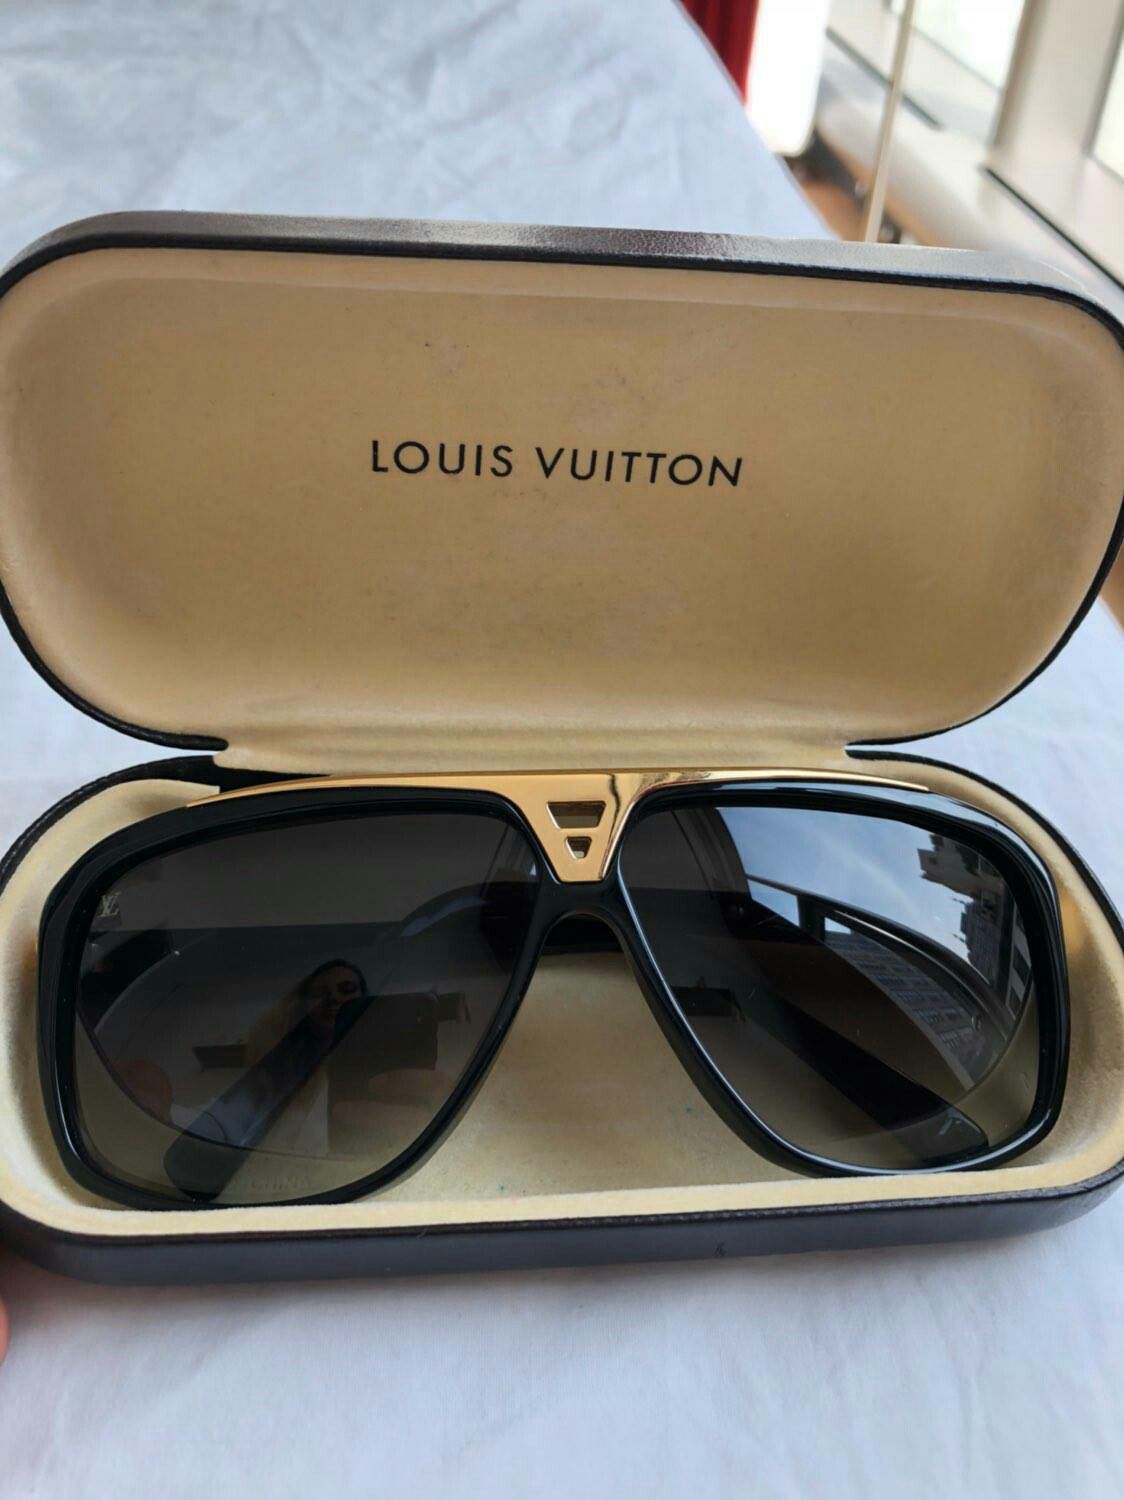 Brand New Unworn Louis vuitton Glasses for Sale in East Haven, CT - OfferUp